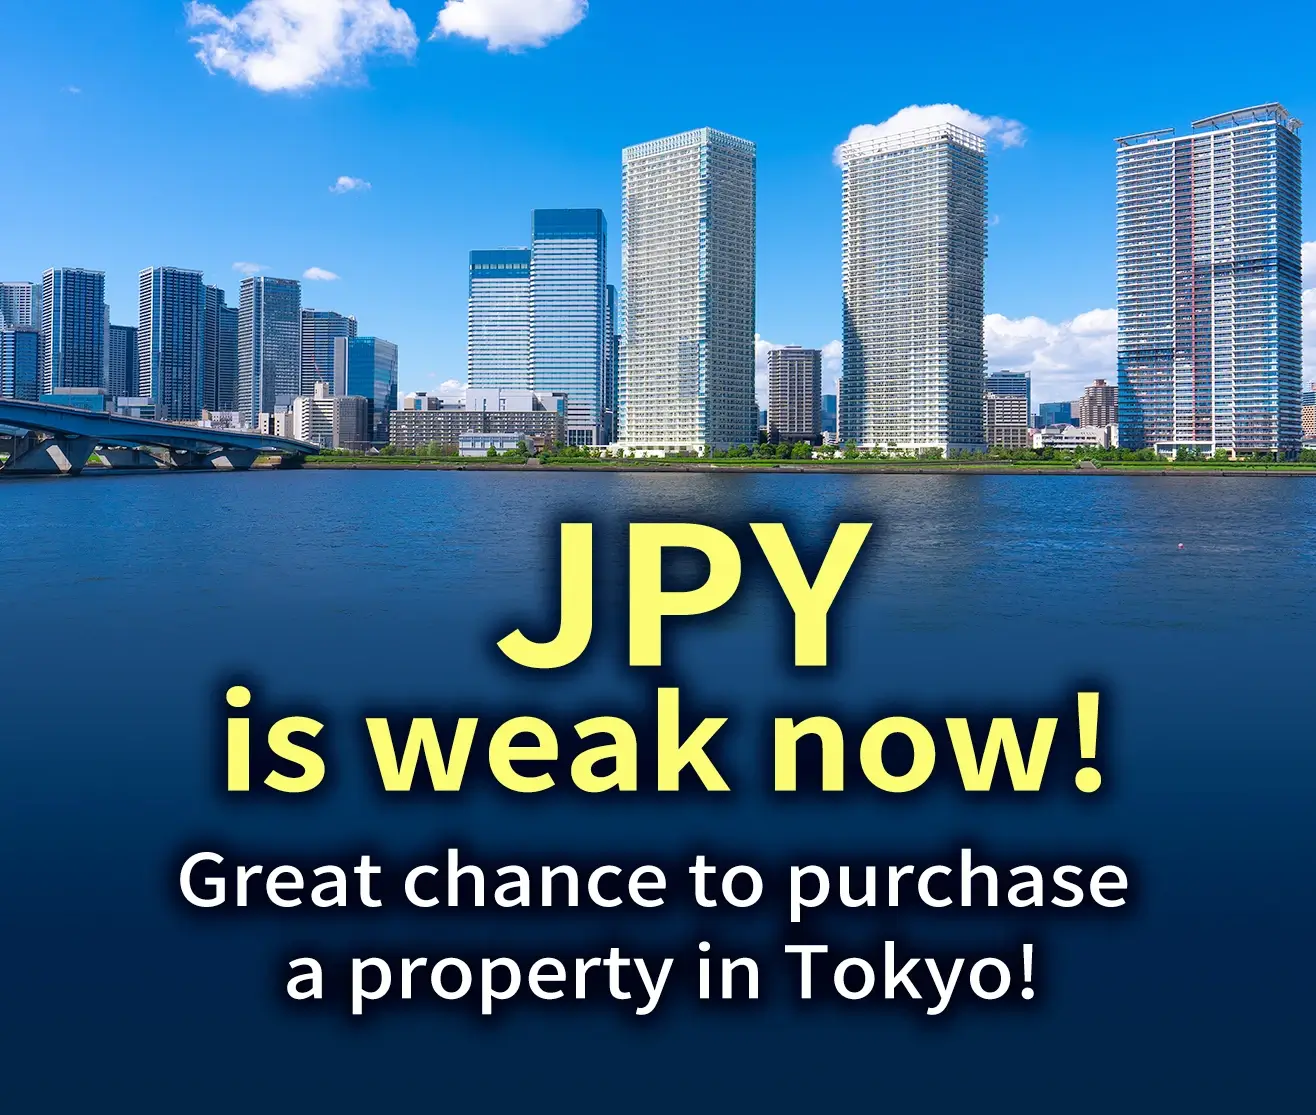 JPY is weak now! Great chance to purchase a property in Tokyo!